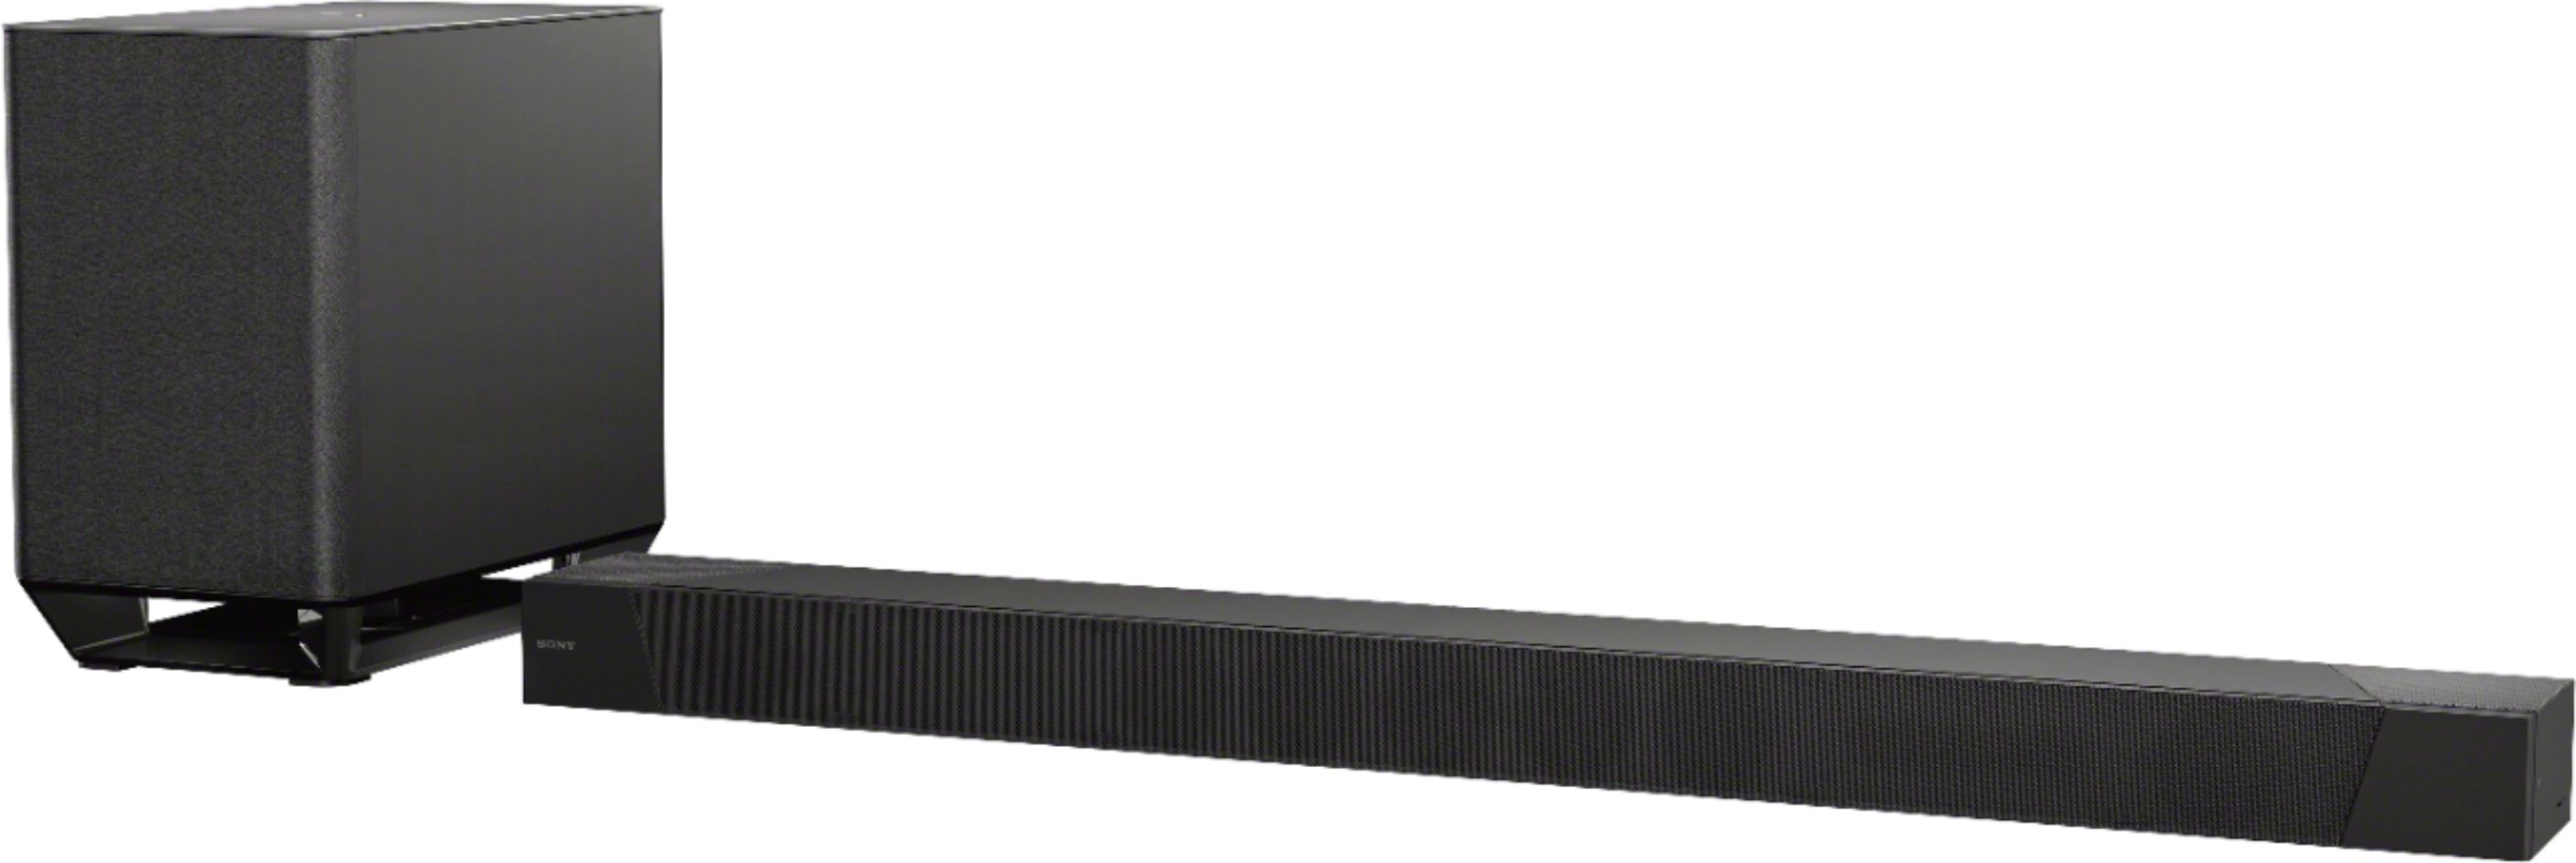 7.1.2-Channel Soundbar with Wireless Subwoofer and Dolby Atmos Black HTST5000 - Best Buy